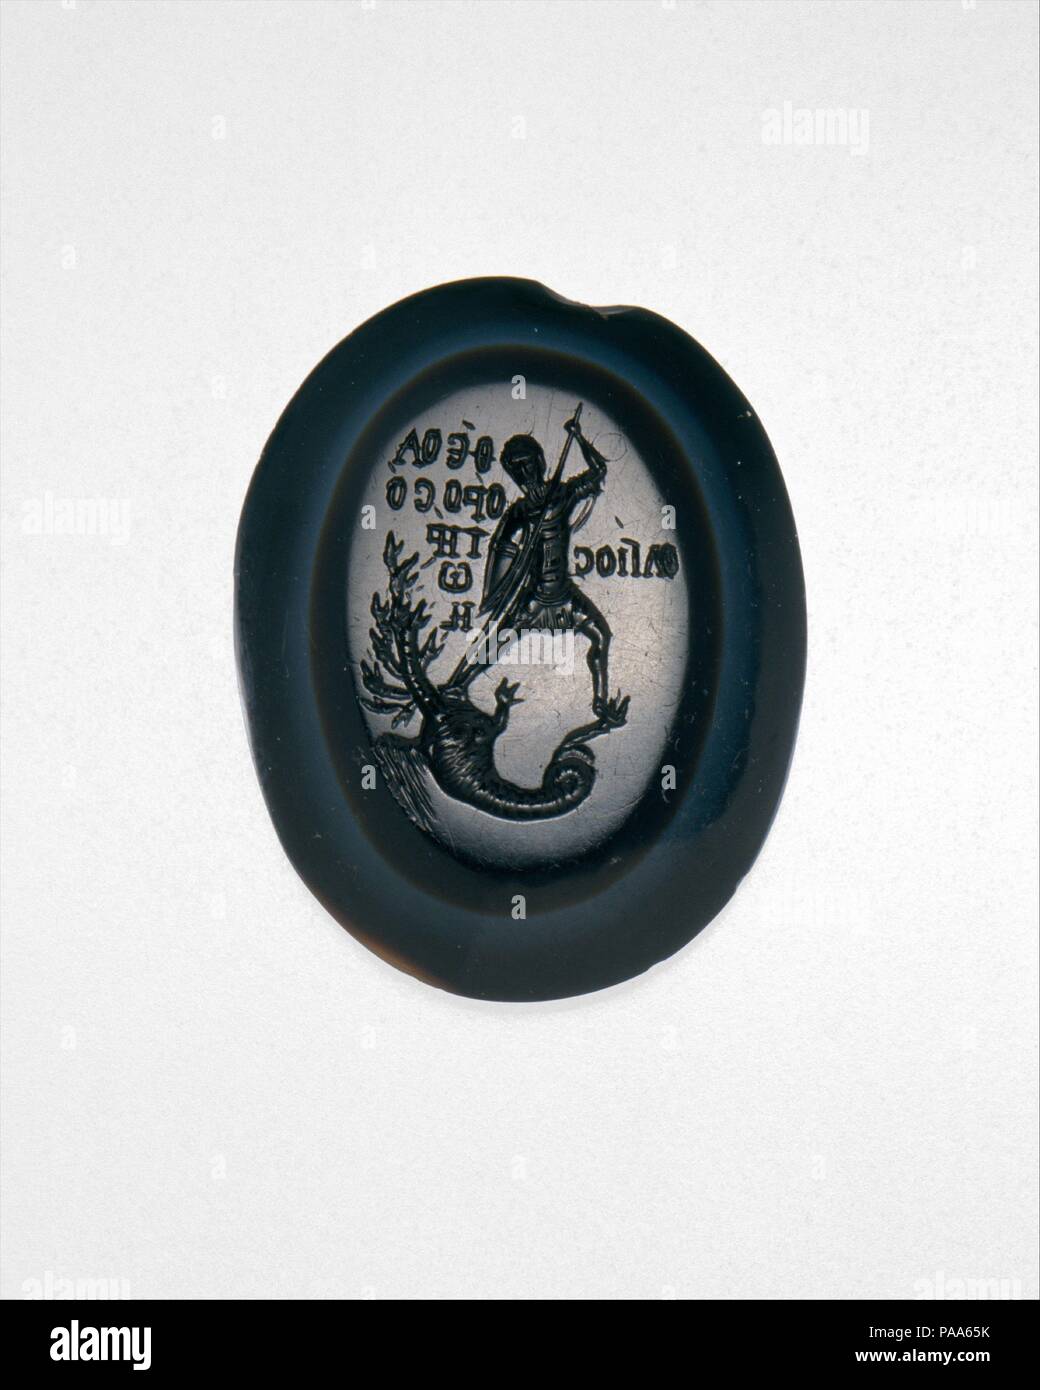 Intaglio with Saint Theodore Teron Slaying a Many-Headed Dragon. Culture: Byzantine. Dimensions: Overall: 1 5/16 x 1 x 1/4in. (3.4 x 2.6 x 0.6cm). Date: 1300 or later.  Theodore Teron (the recruit) was one of several soldier-martyrs whose cults were enormously popular in the later centuries of the Byzantine Empire. This intaglio illustrates Theodore's miraculous slaying of a dragon. The image reflects the revival of classical culture that took place in Byzantium in the 1300s and 1400s; with its naturalistic stance, it recalls classical depictions of Herakles battling the many-headed hydra. Mus Stock Photo